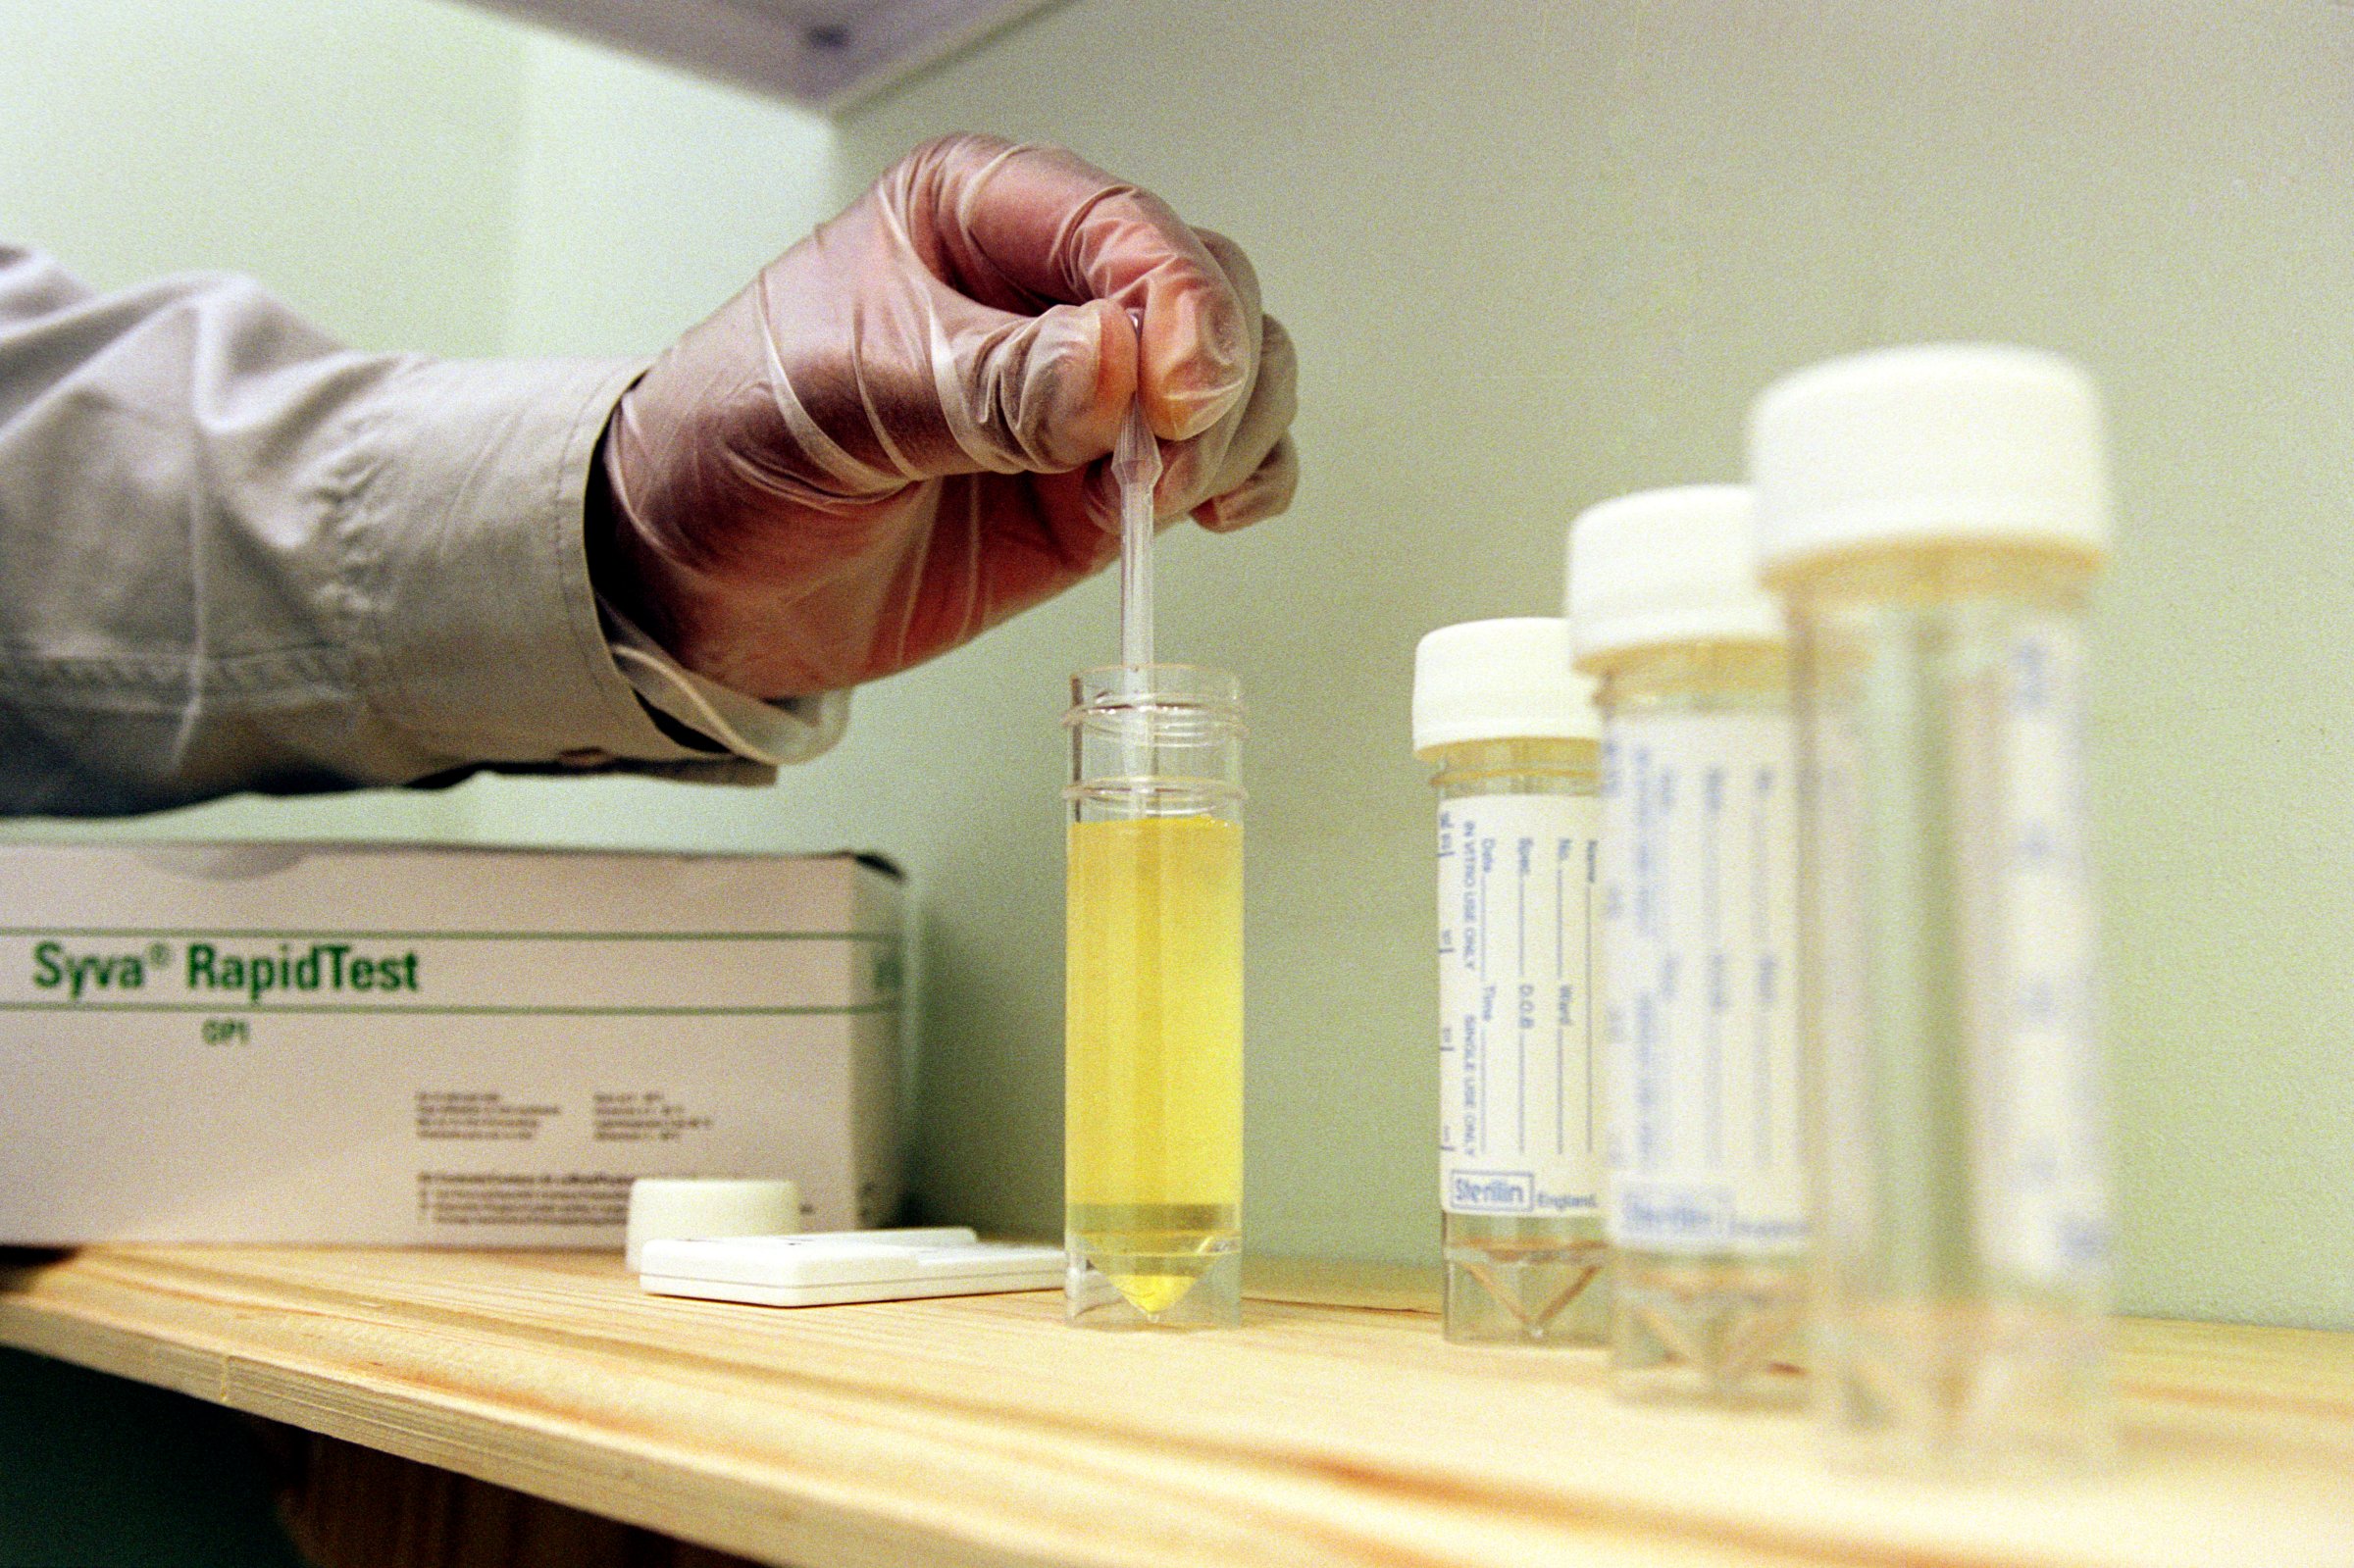 Drug counsellor testing urine for traces of drugs.